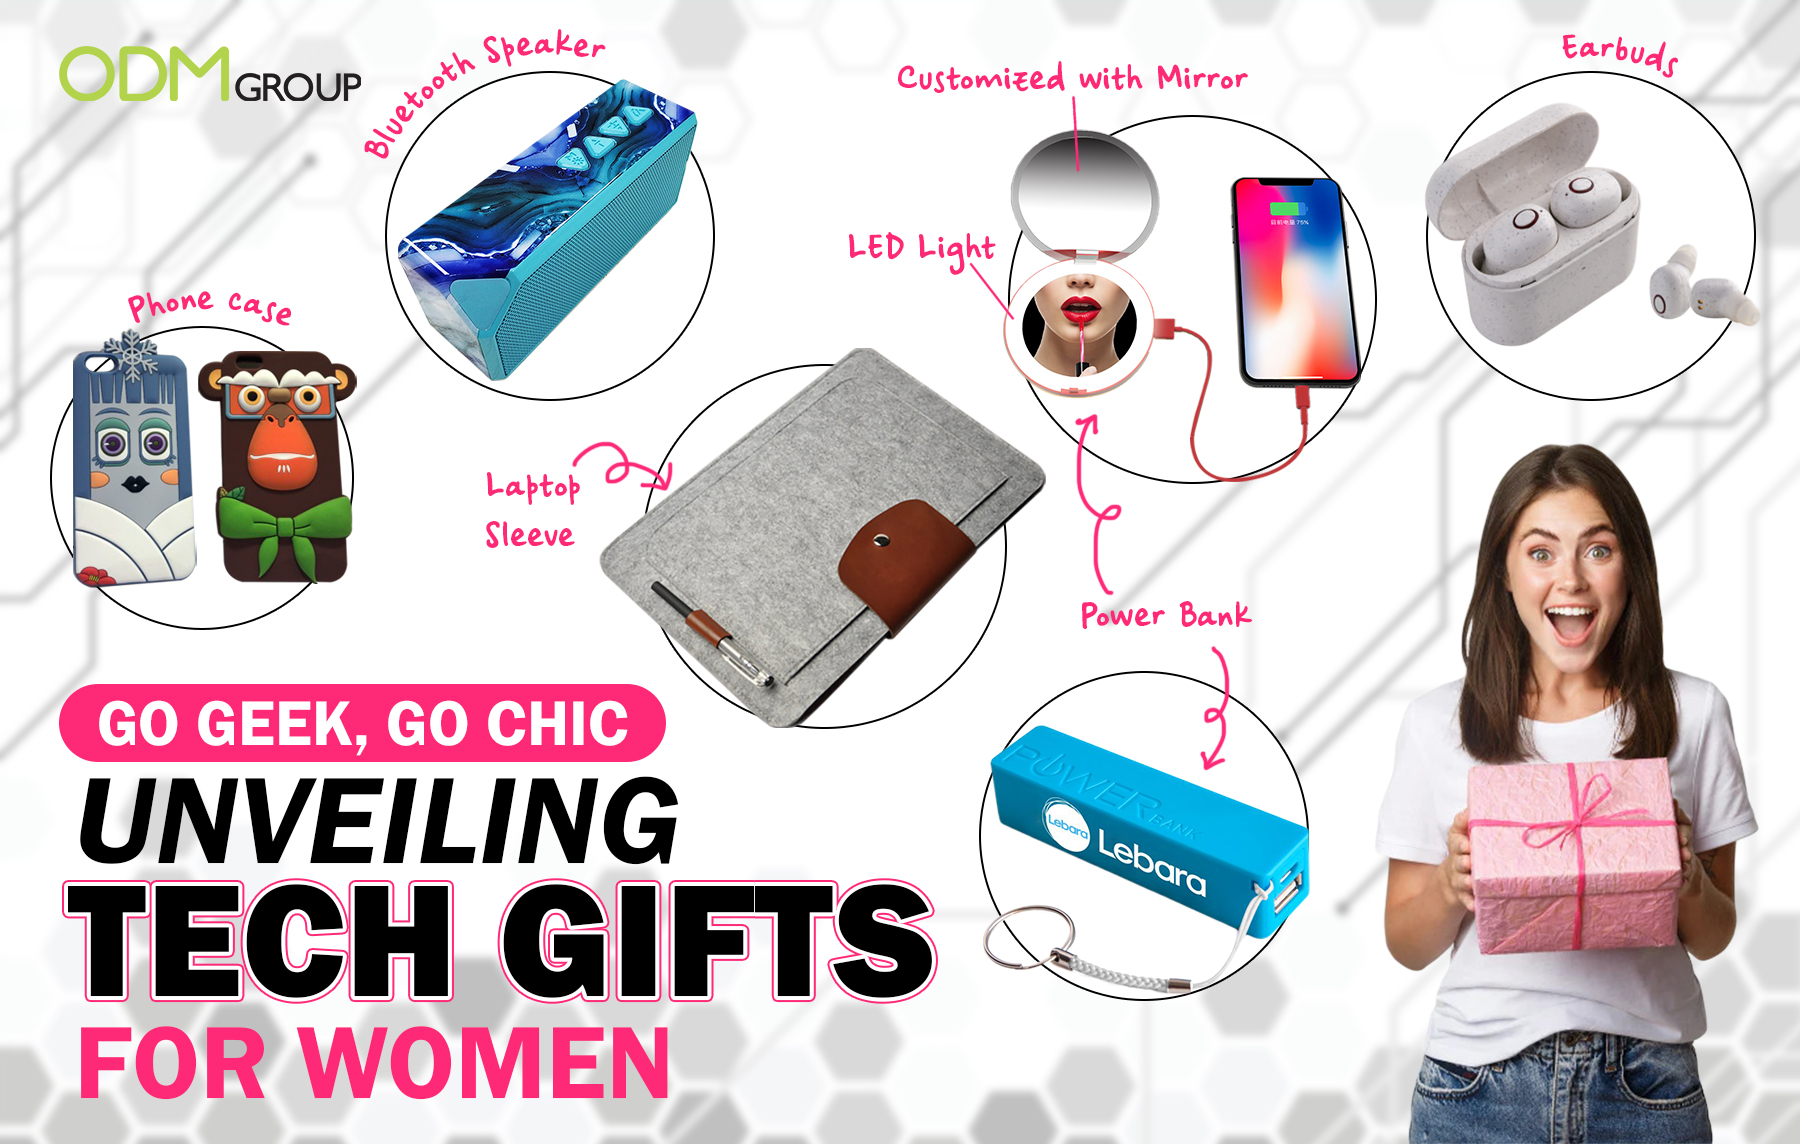 Collage of tech gifts for women including a Bluetooth speaker, phone case, laptop sleeve, earbuds, and power bank.